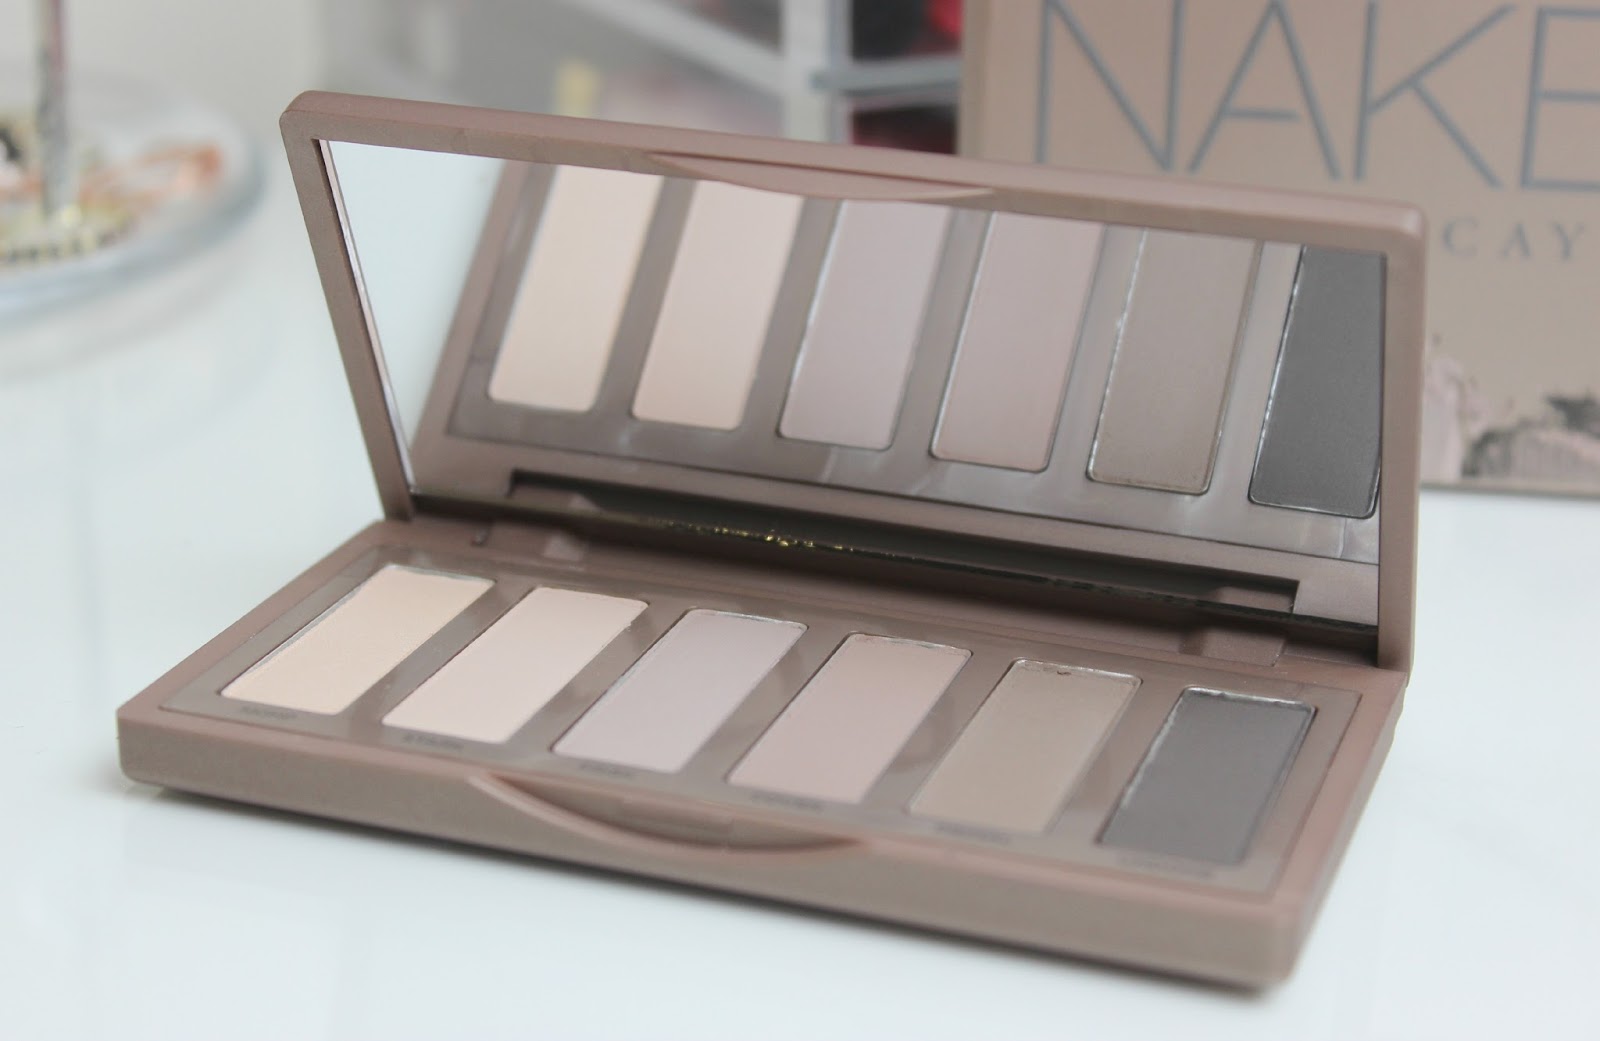 A picture of Urban Decay Naked Basics 2